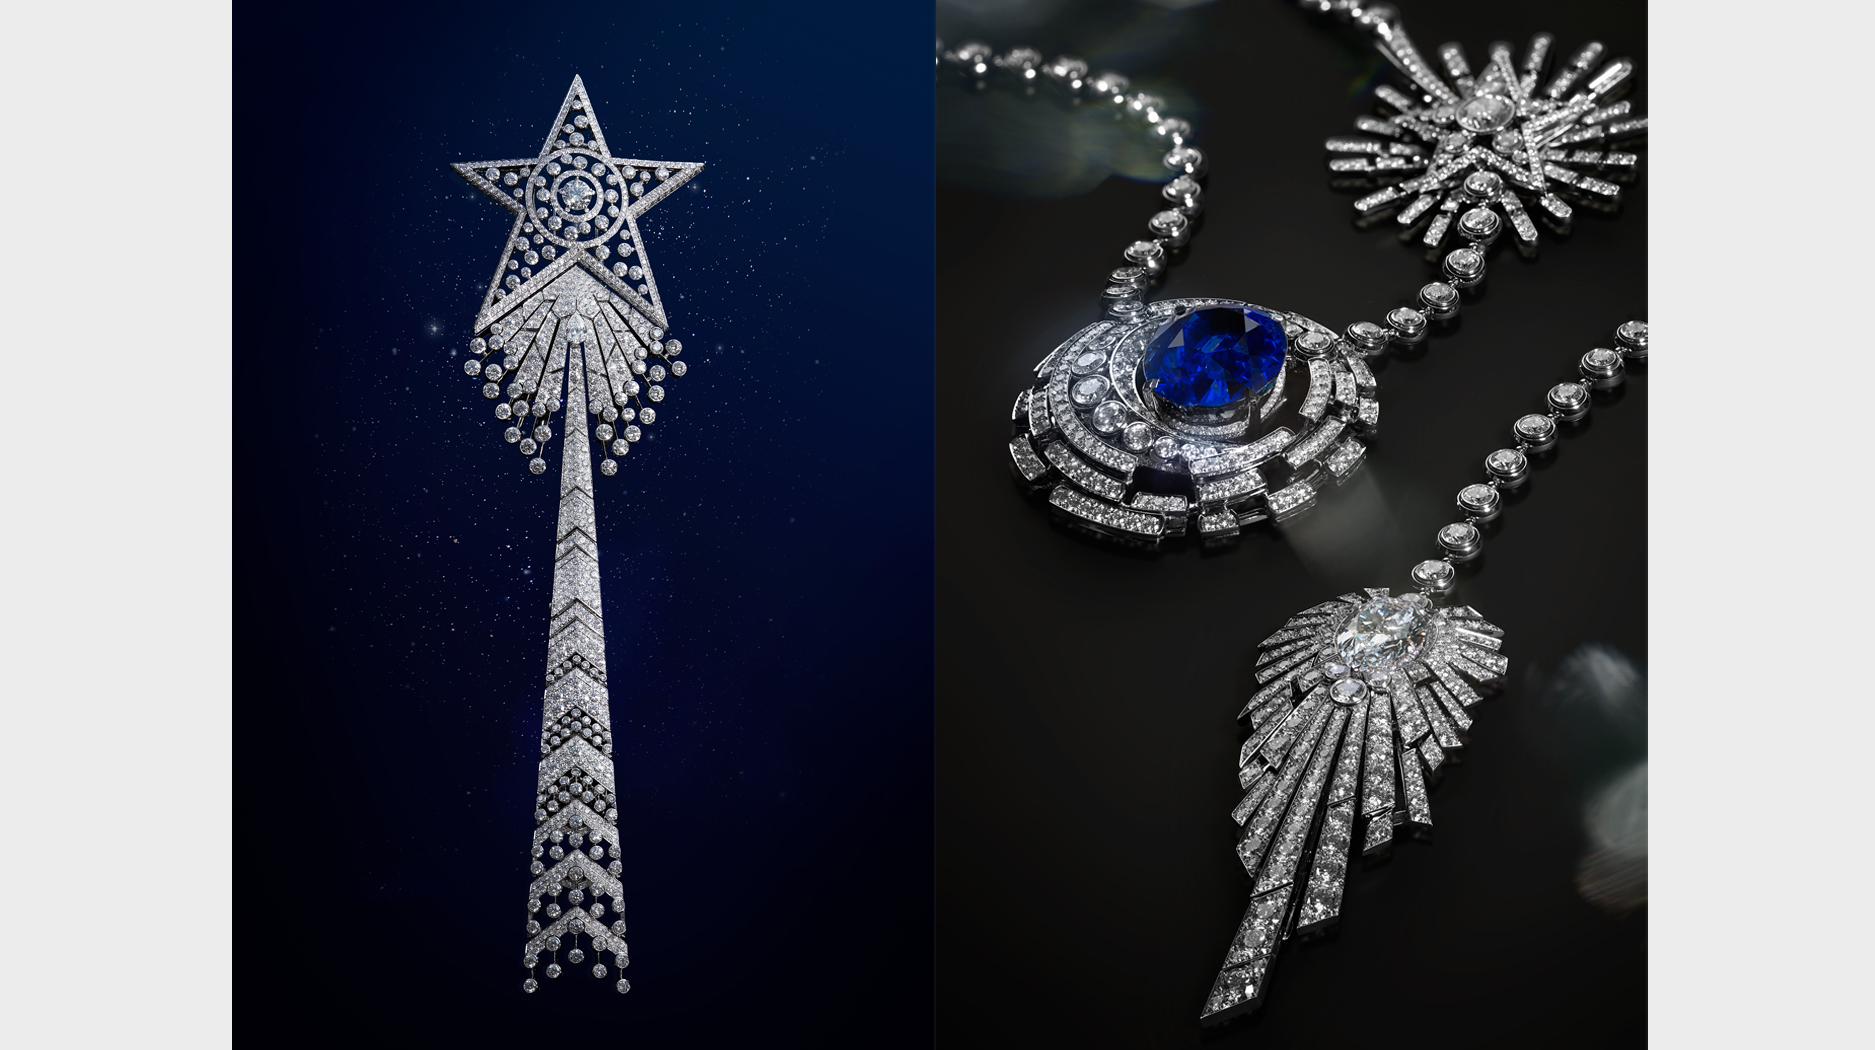 The Lowdown on Chanels Tweed High Jewellery Collection